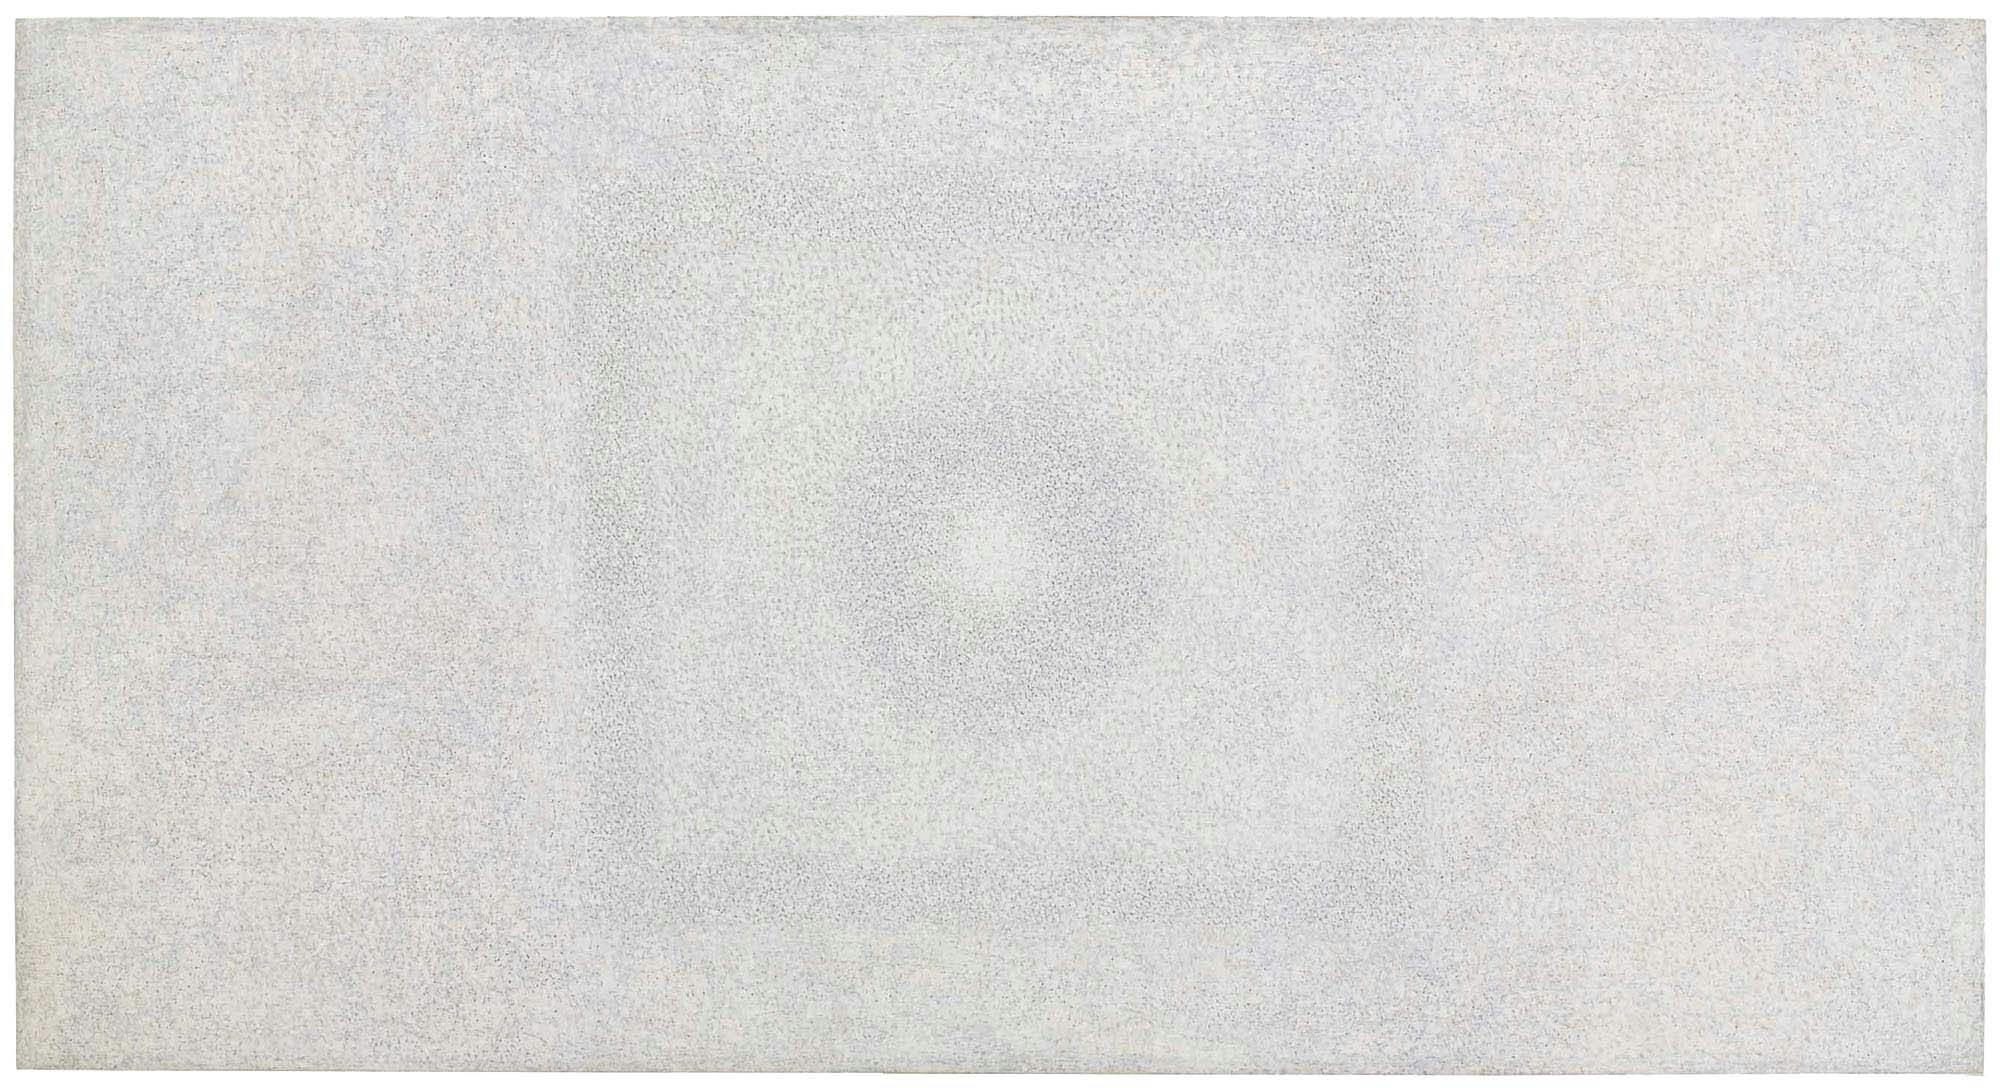 Eye of the Circle
1975
Oil on linen
44 1/2 x 83 in. (113 x 210.8 cm)
 – The Richard Pousette-Dart Foundation